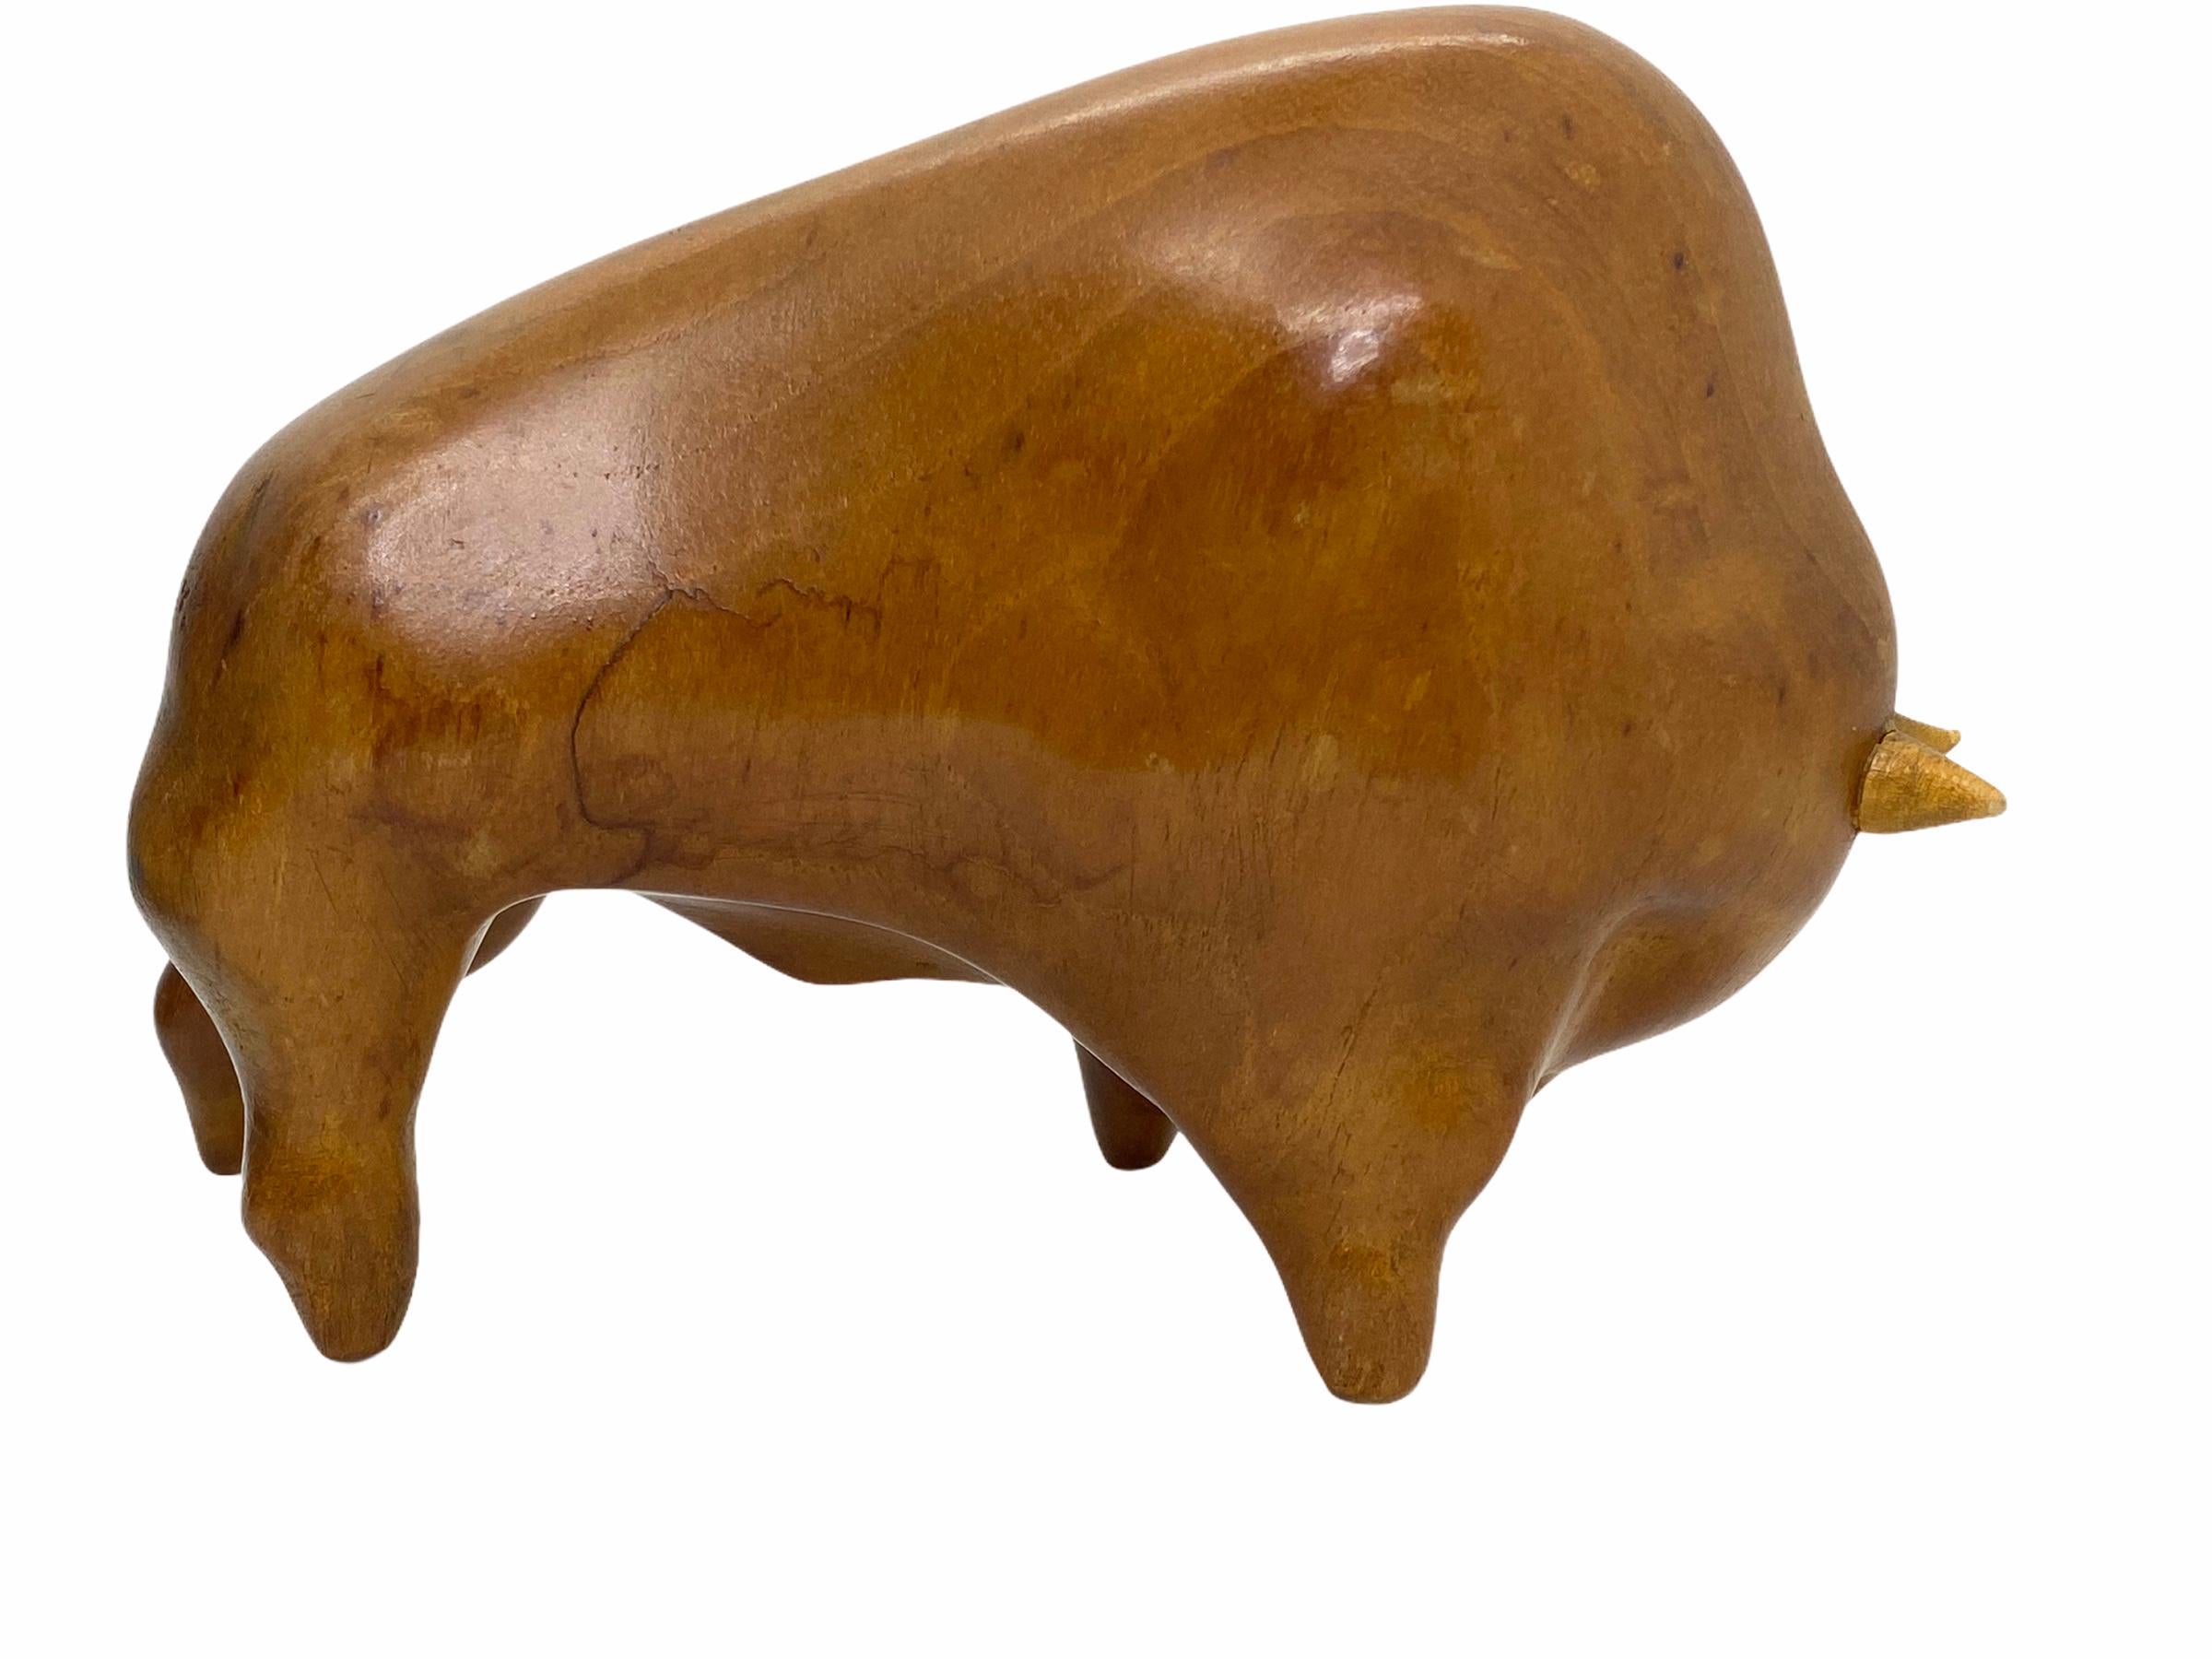 Classic early 1960s Danish design wood bull sculpture. Nice addition to your table or just for your collection of design items. Made of wood. Found at an estate sale in Vienna, Austria.